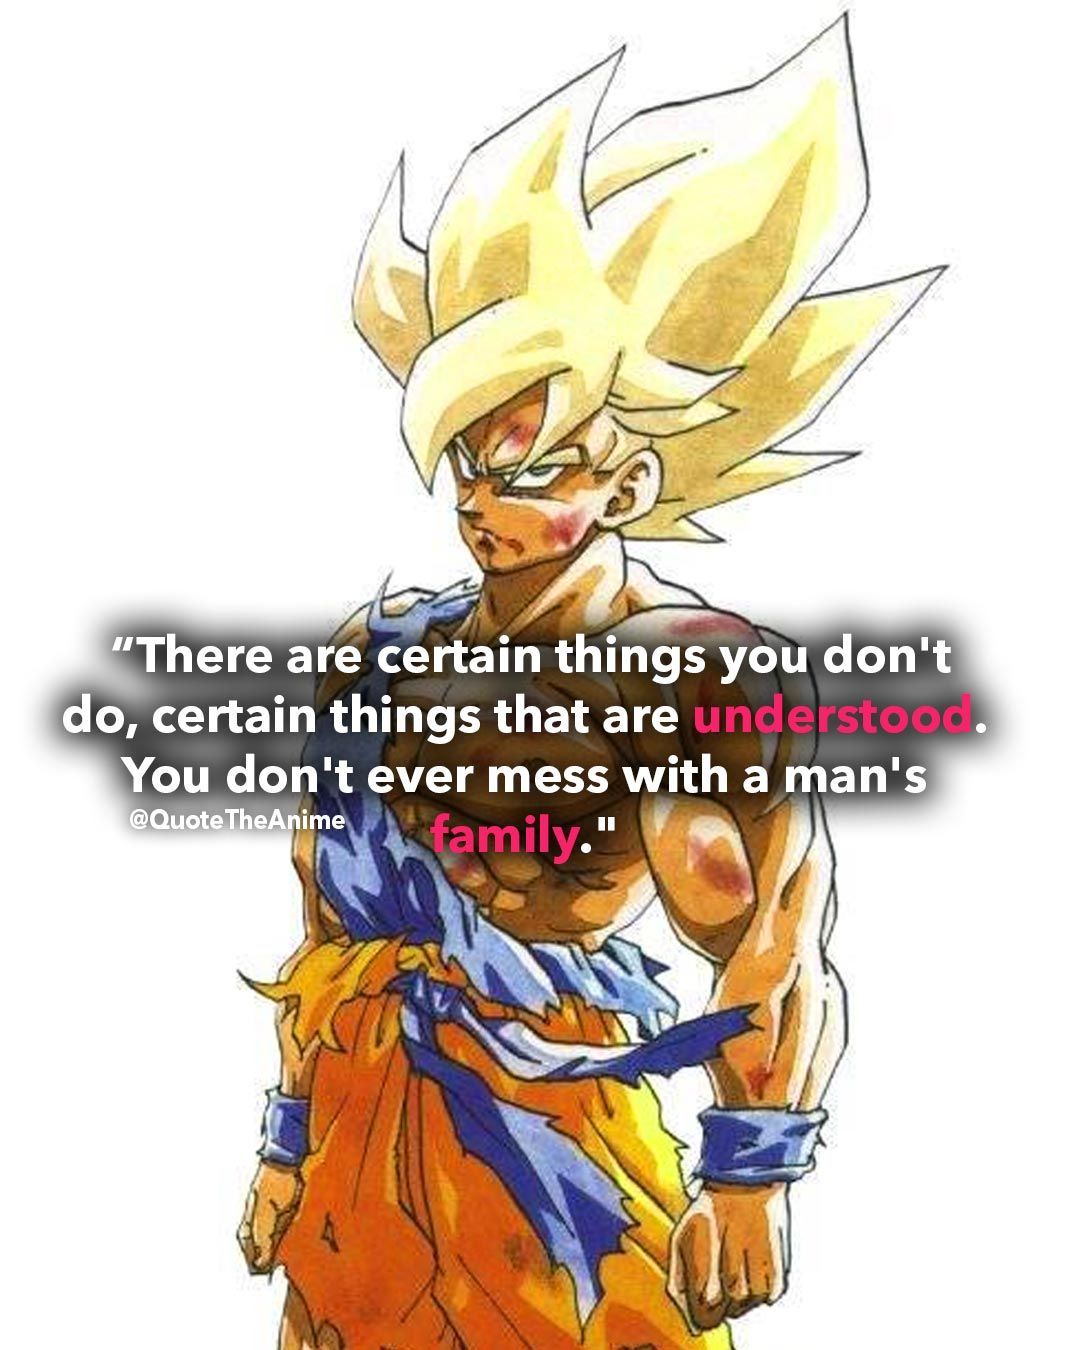 I will not let you destroy my world!!!!. Goku quotes, Dragon ball image, Dragon ball wallpaper